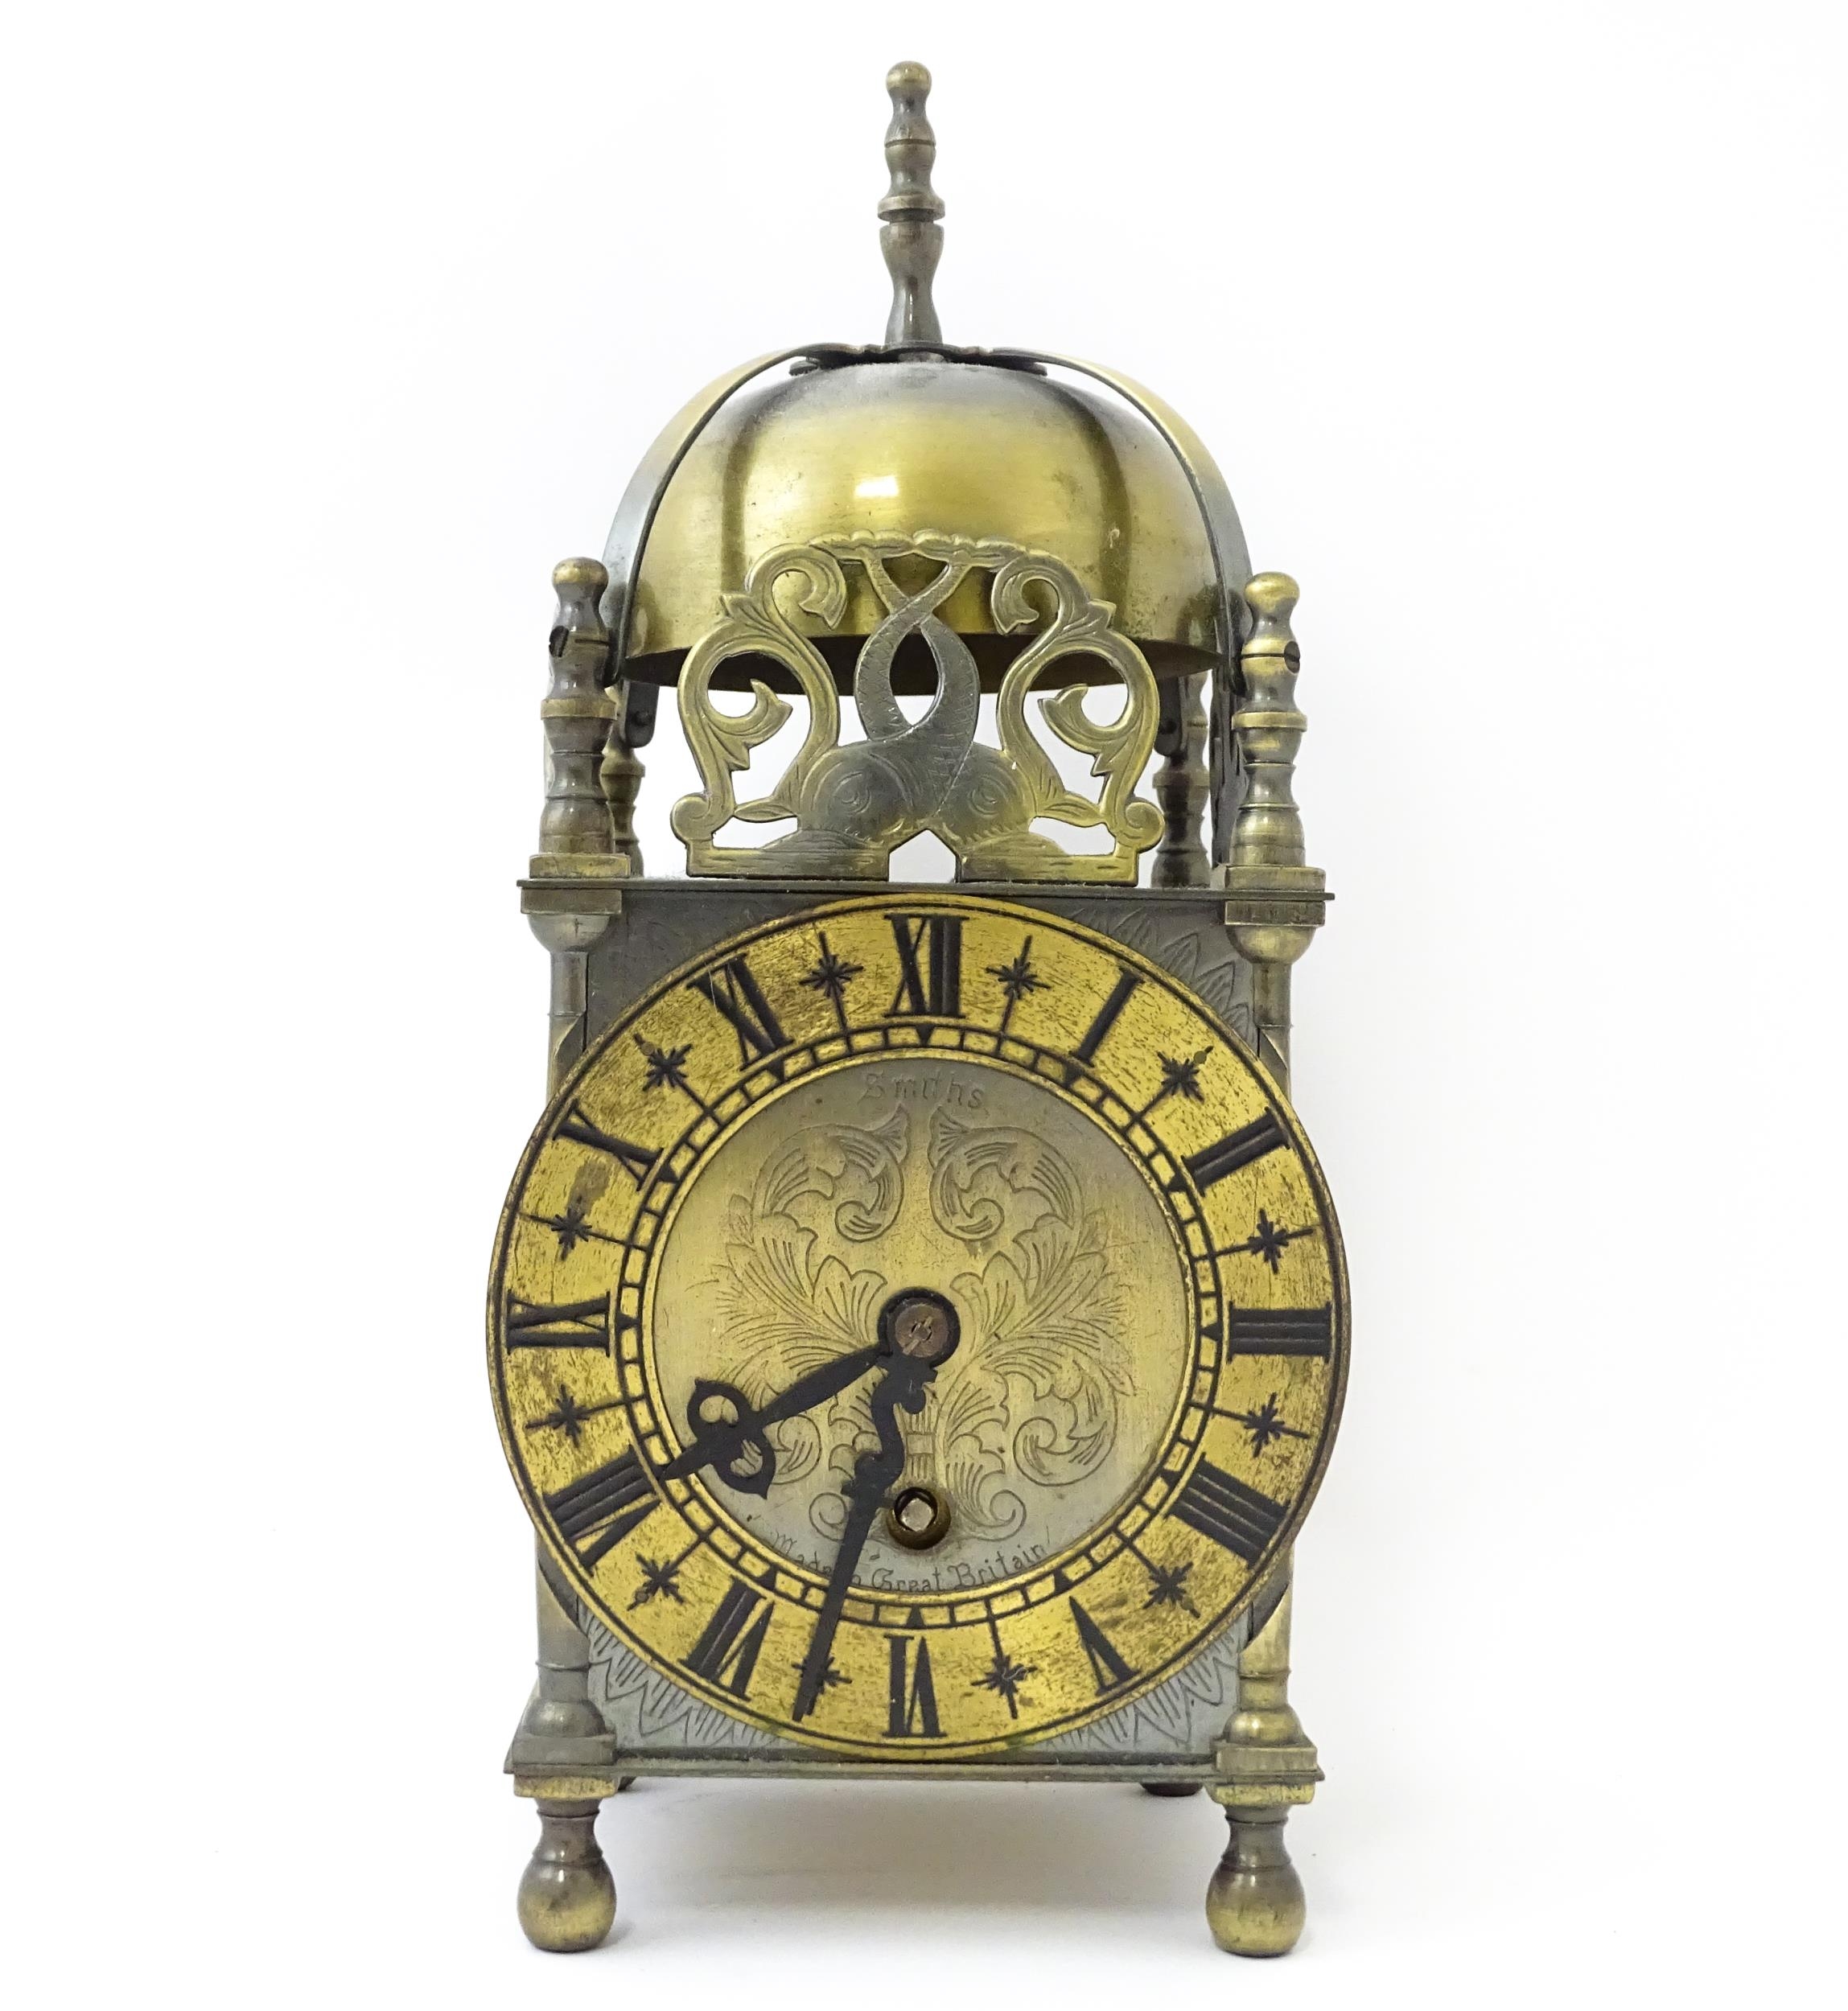 Smiths - Great Britain : A 20thC brass lantern clock by Smiths with engraved dial and Roman